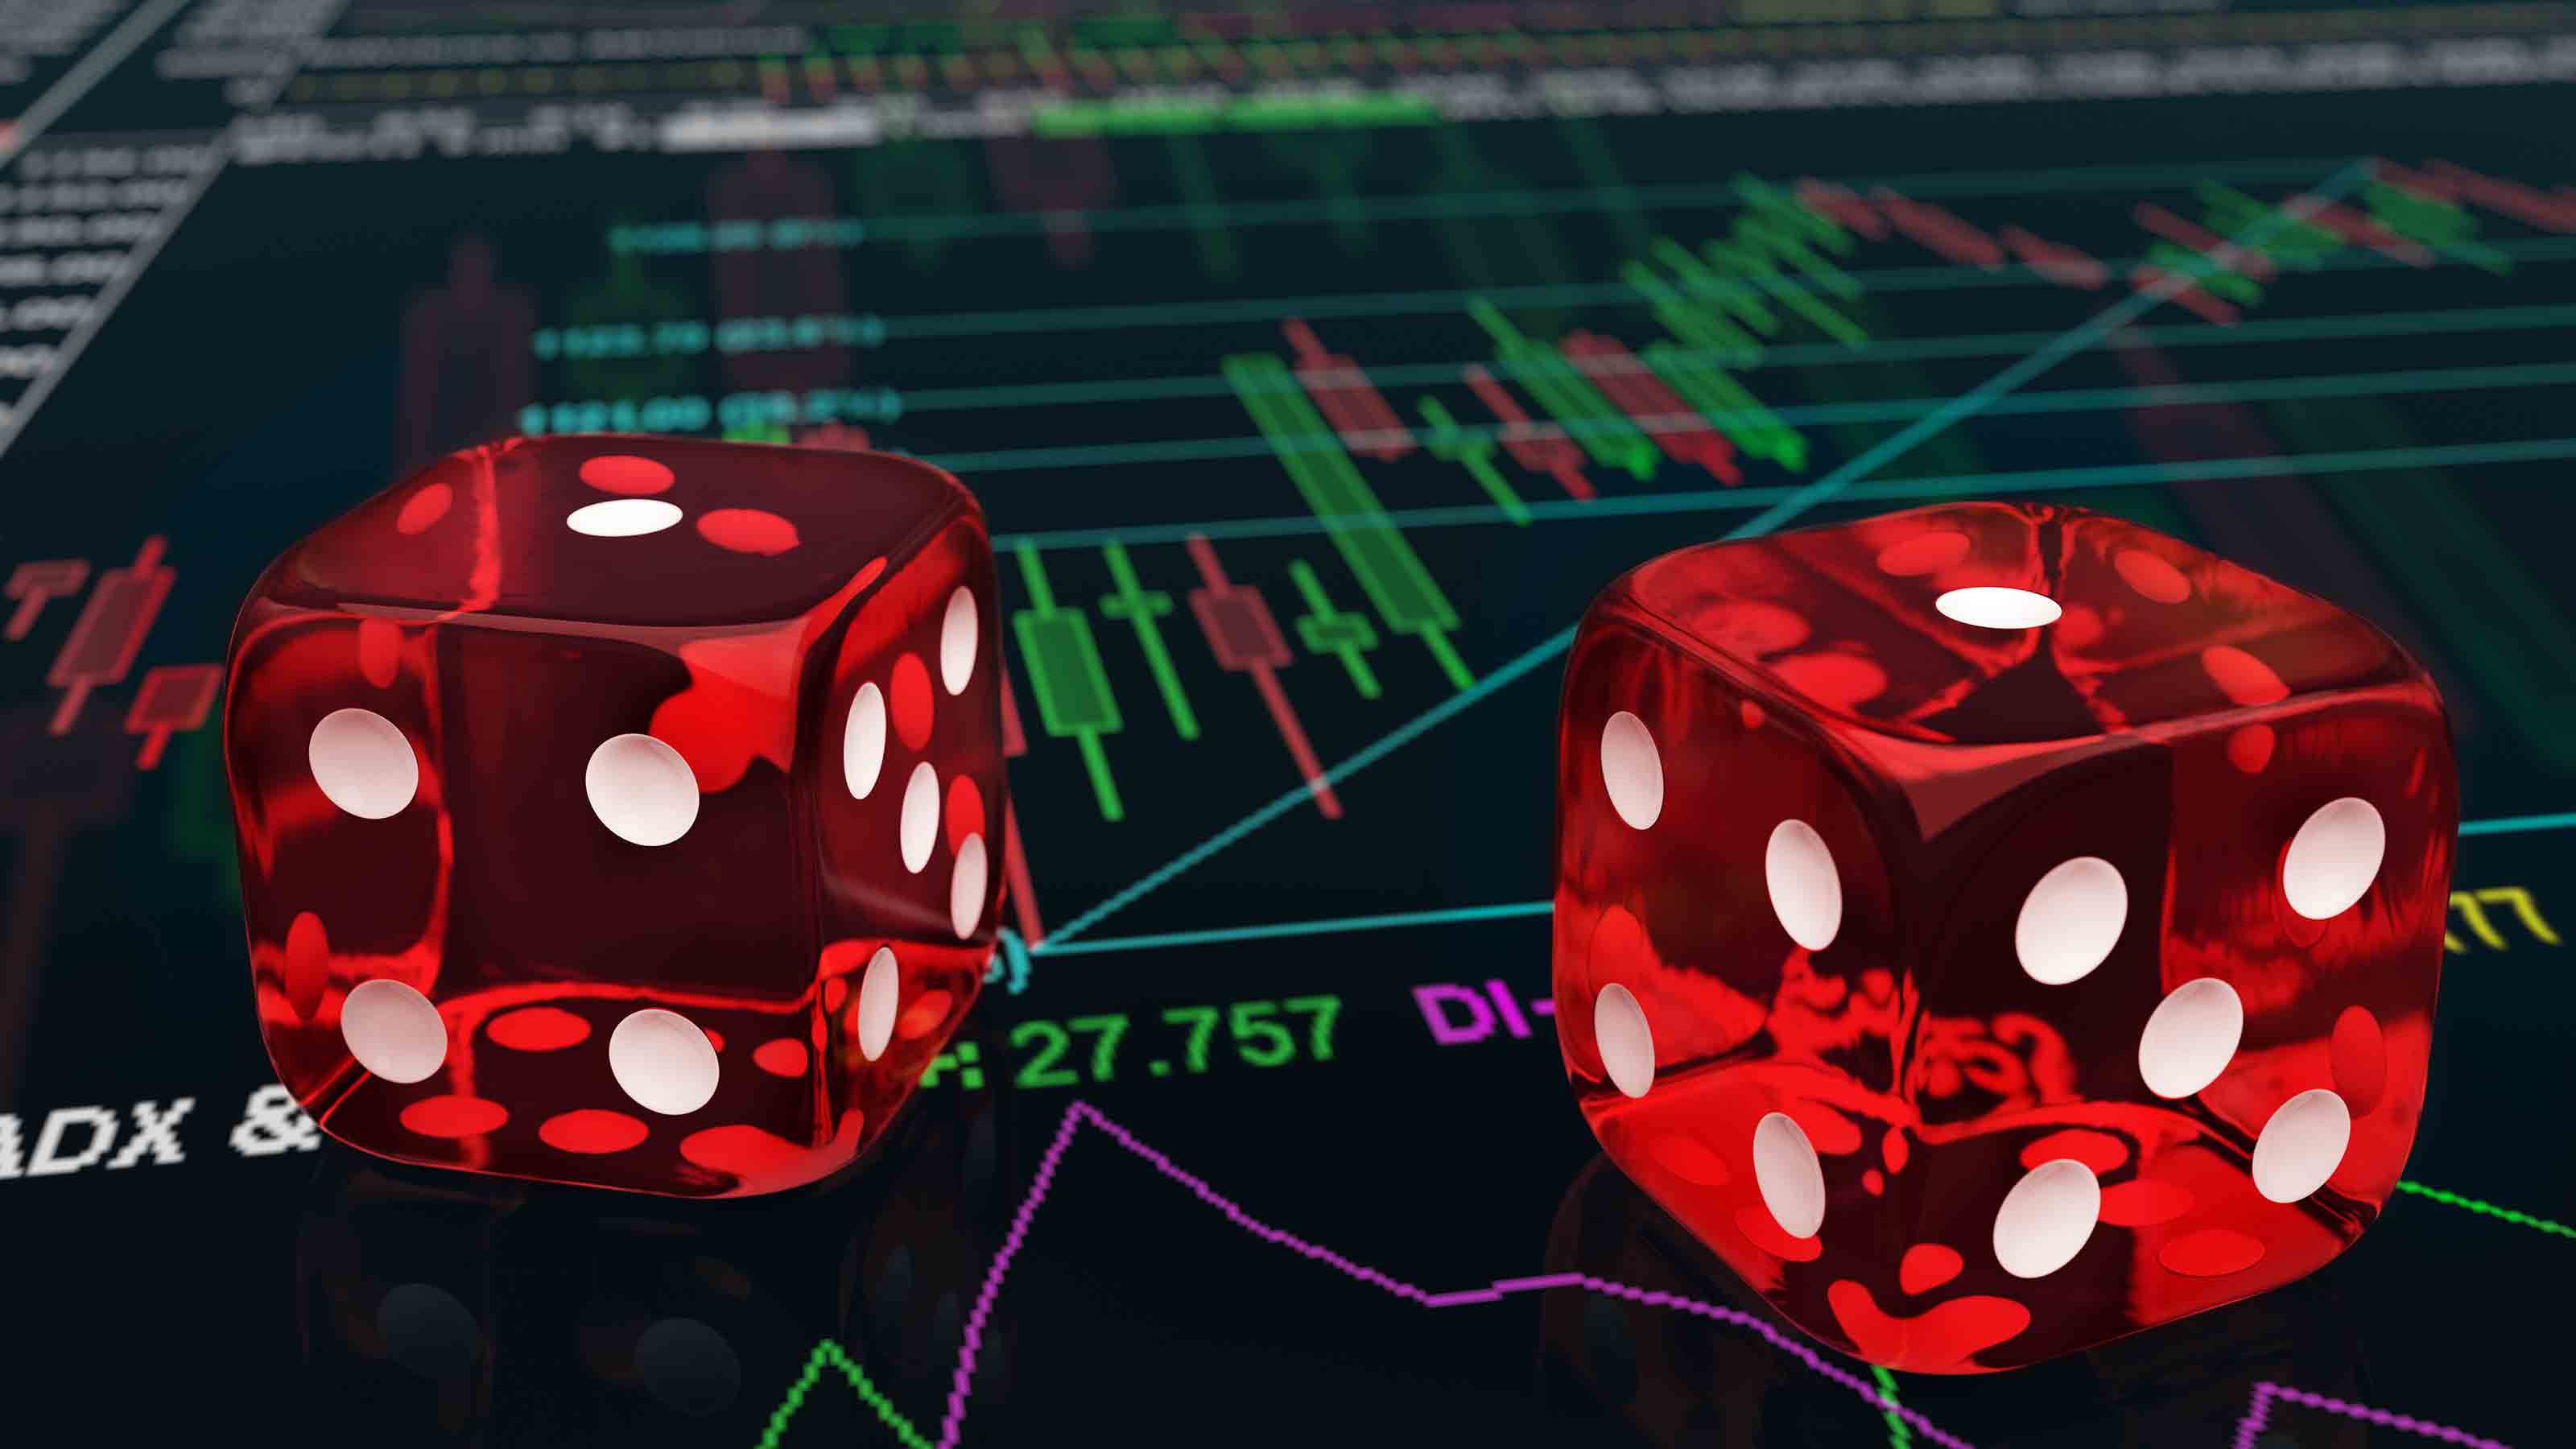 Betting on the Stock Market: A Risky Gamble?